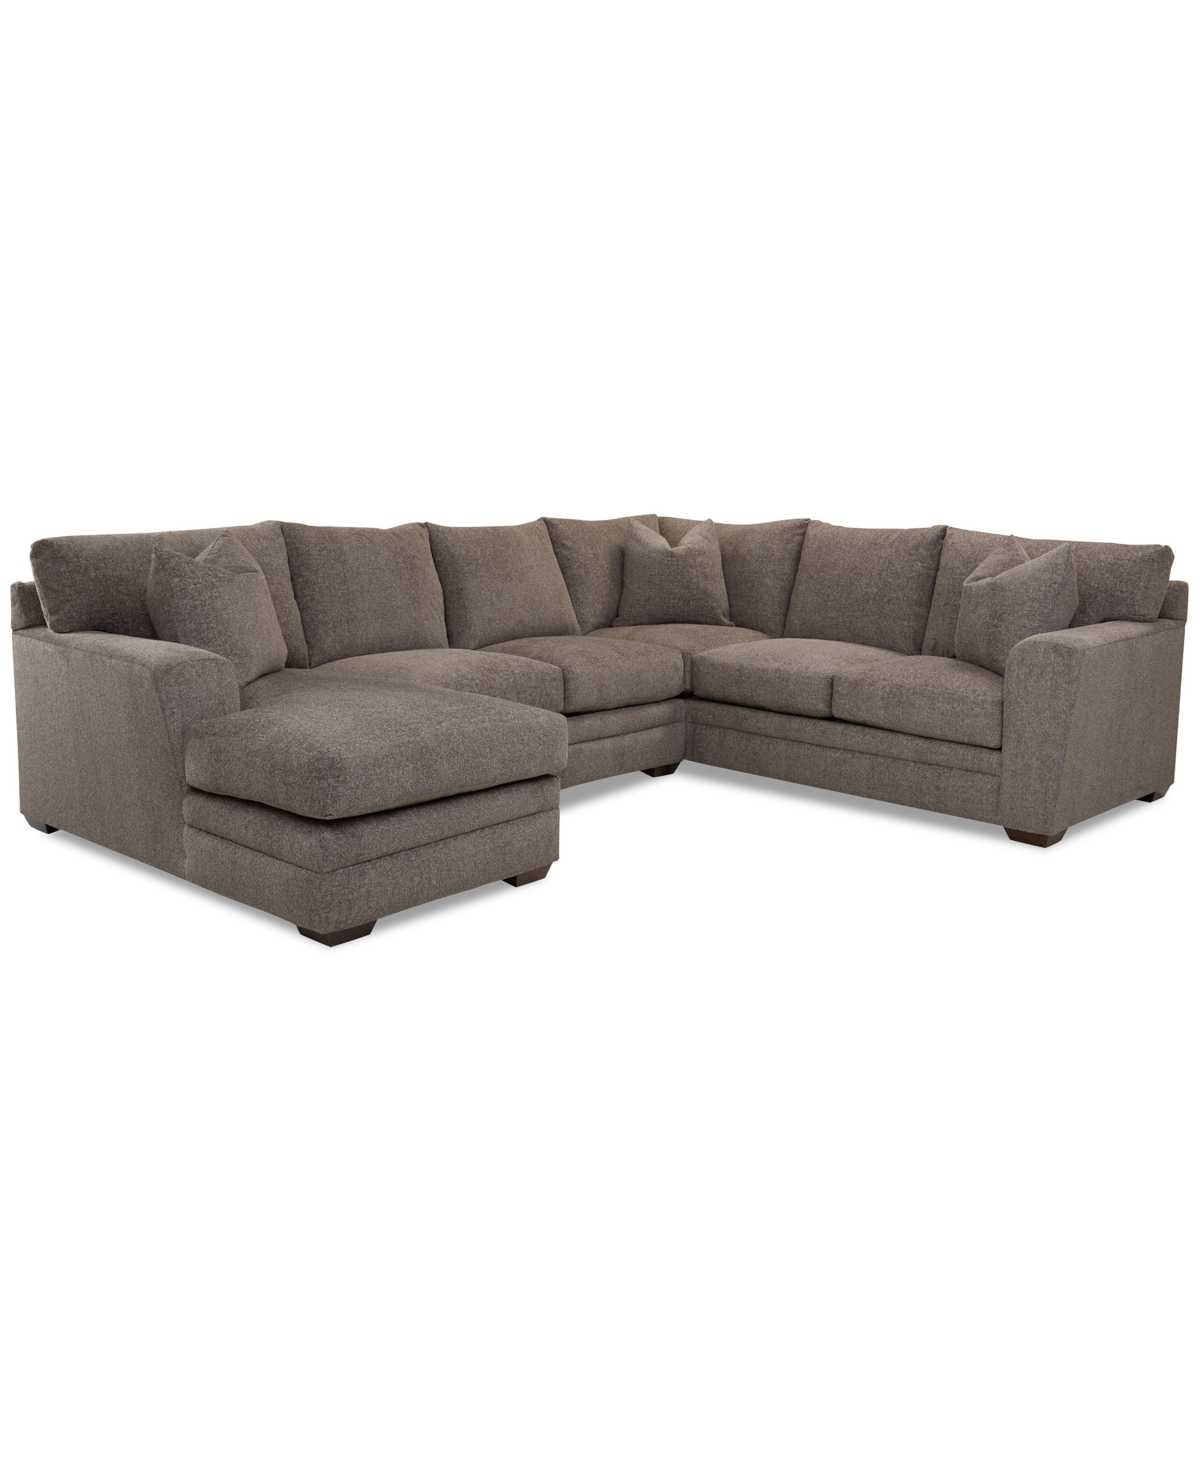 Closeout! Loranna 3-Pc. Fabric Sectional with Chaise, Created for Macy's - Tan